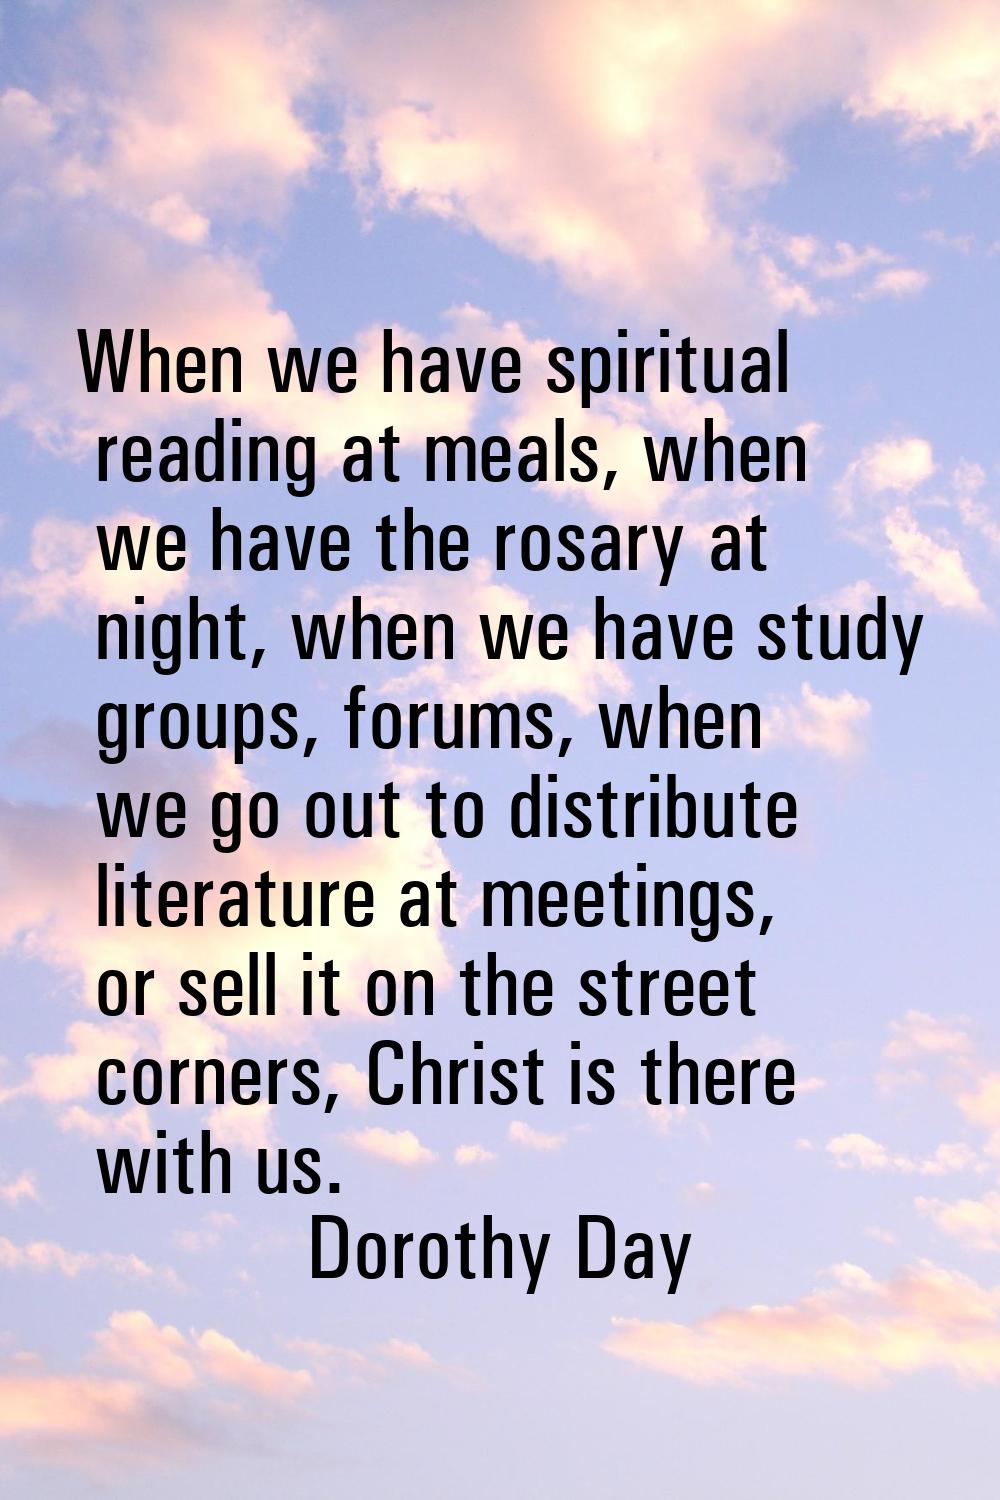 When we have spiritual reading at meals, when we have the rosary at night, when we have study group